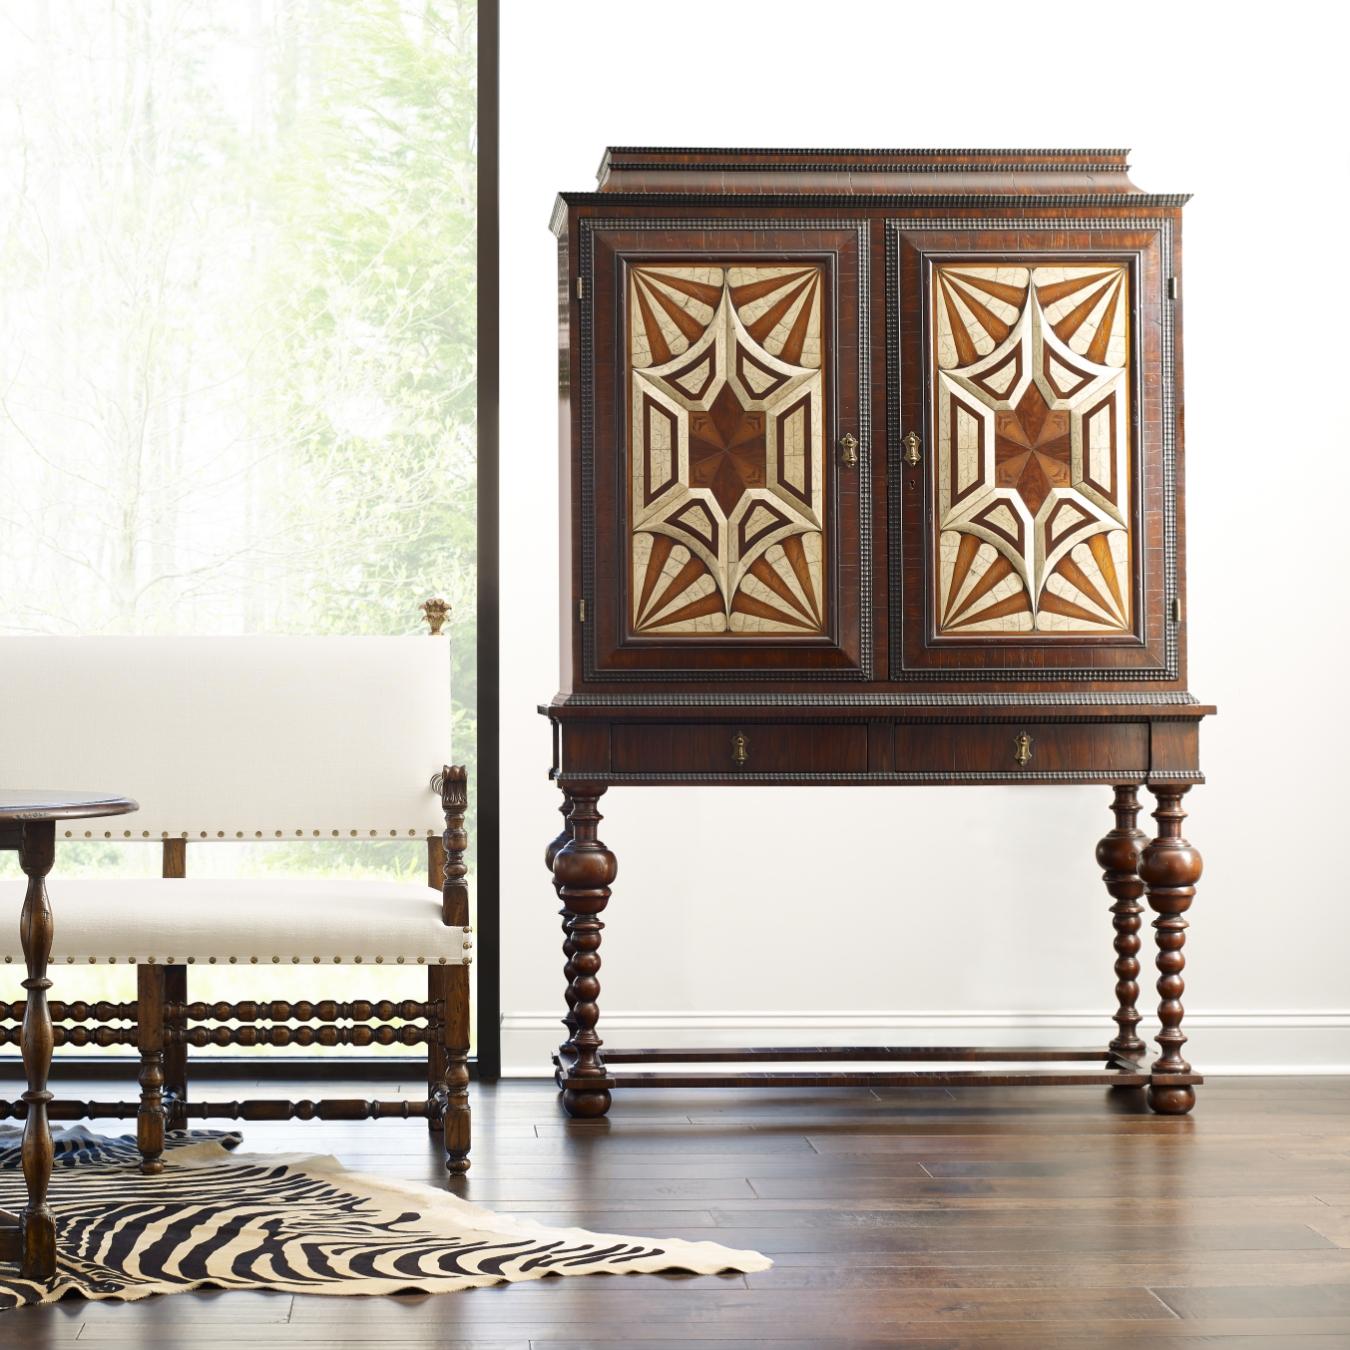 The Toledo armoire is made from wood and has a geometric bone inlay decoration on its doors. Pulling from dutch and Spanish influences, this bold piece is sure to inspire awe.
